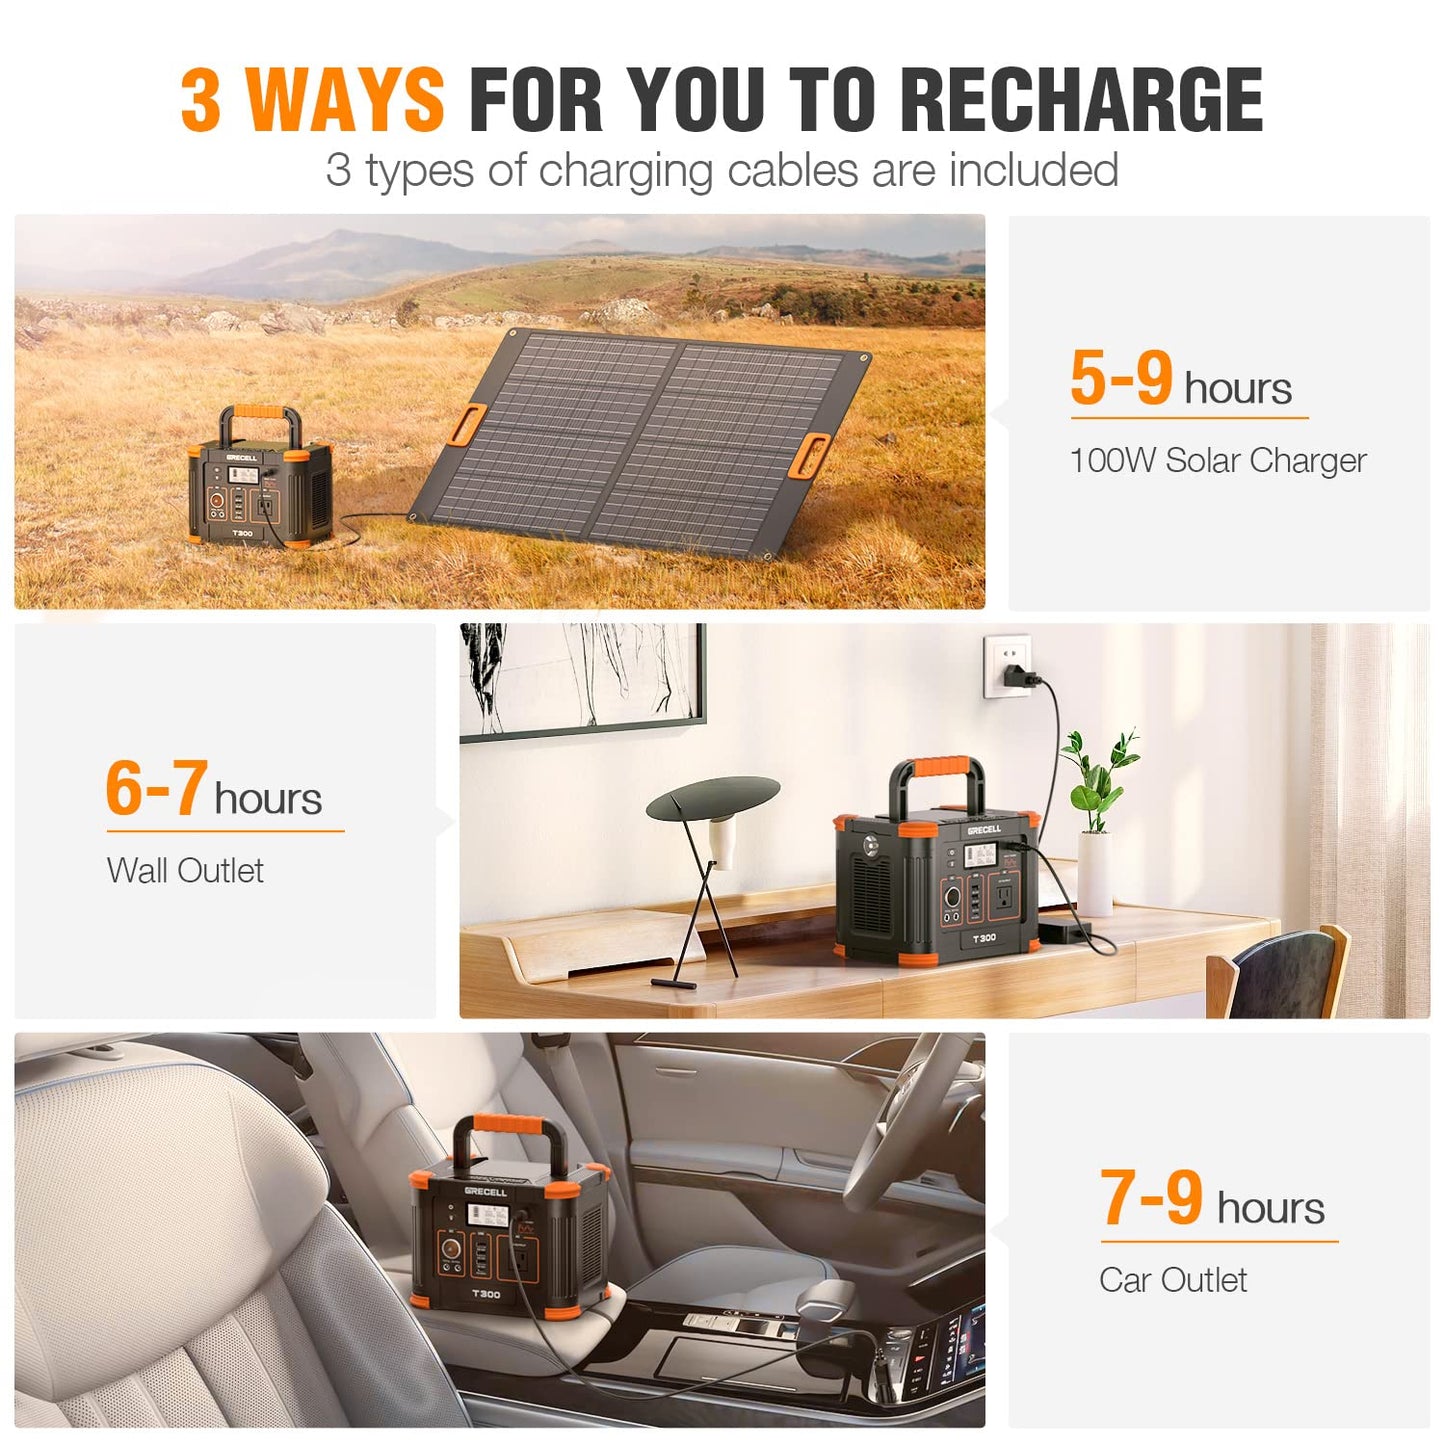 GRECELL Portable Power Station 330W Solar Generator Fast Charging Emergency Power Backup Battery UPS for Home Outage RV/Van Road Trip Camping